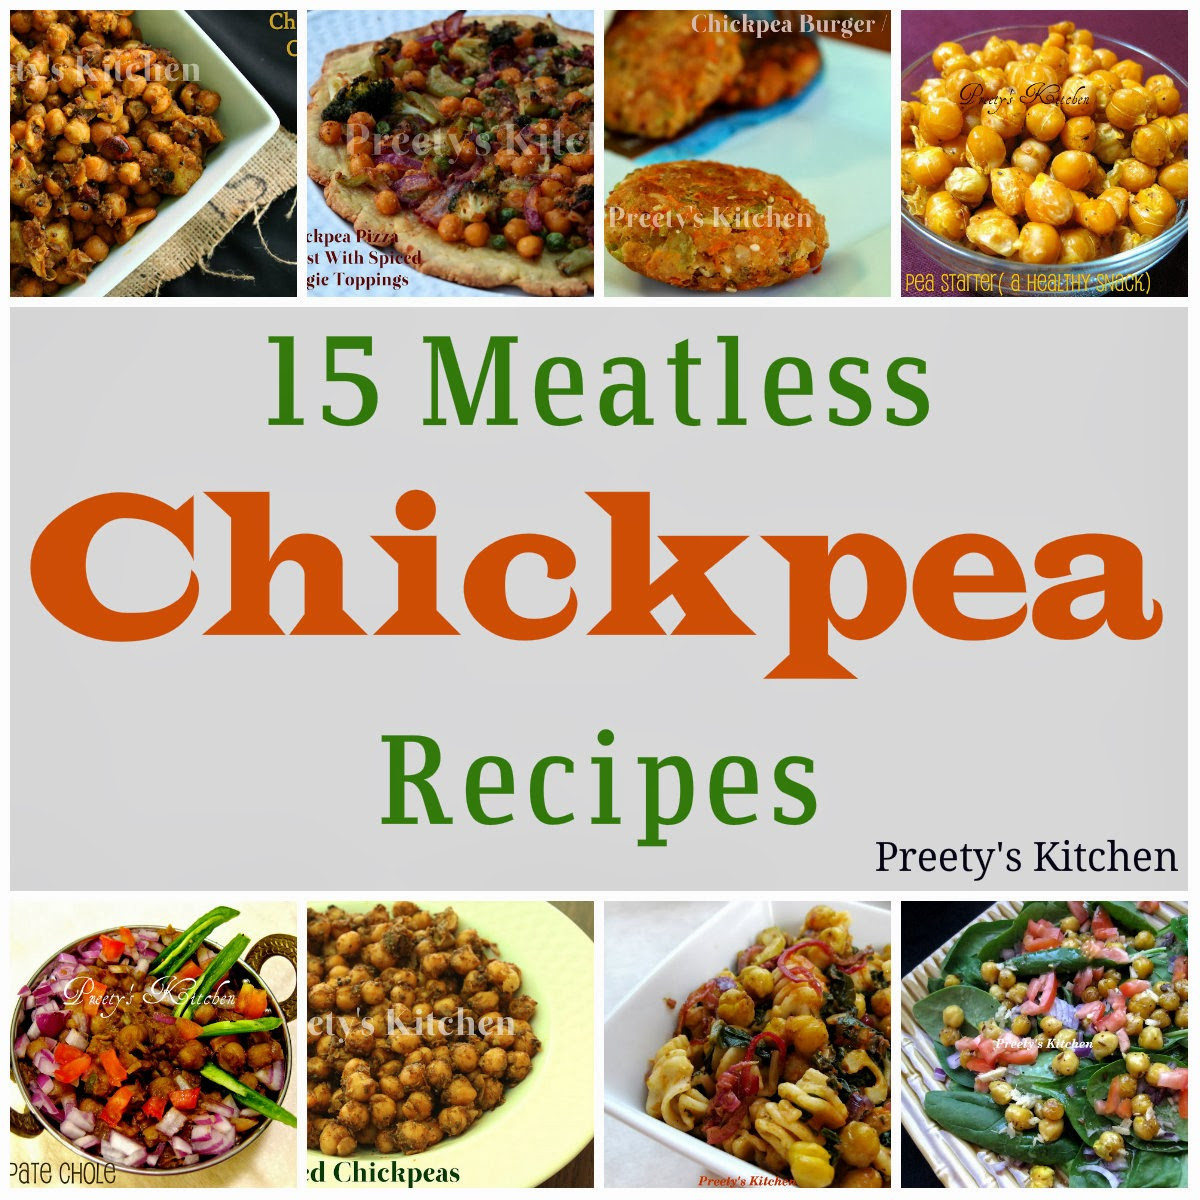 Vegetarian Chickpea Recipes
 Preety s Kitchen 15 Meatless Chickpea Recipes Vegan